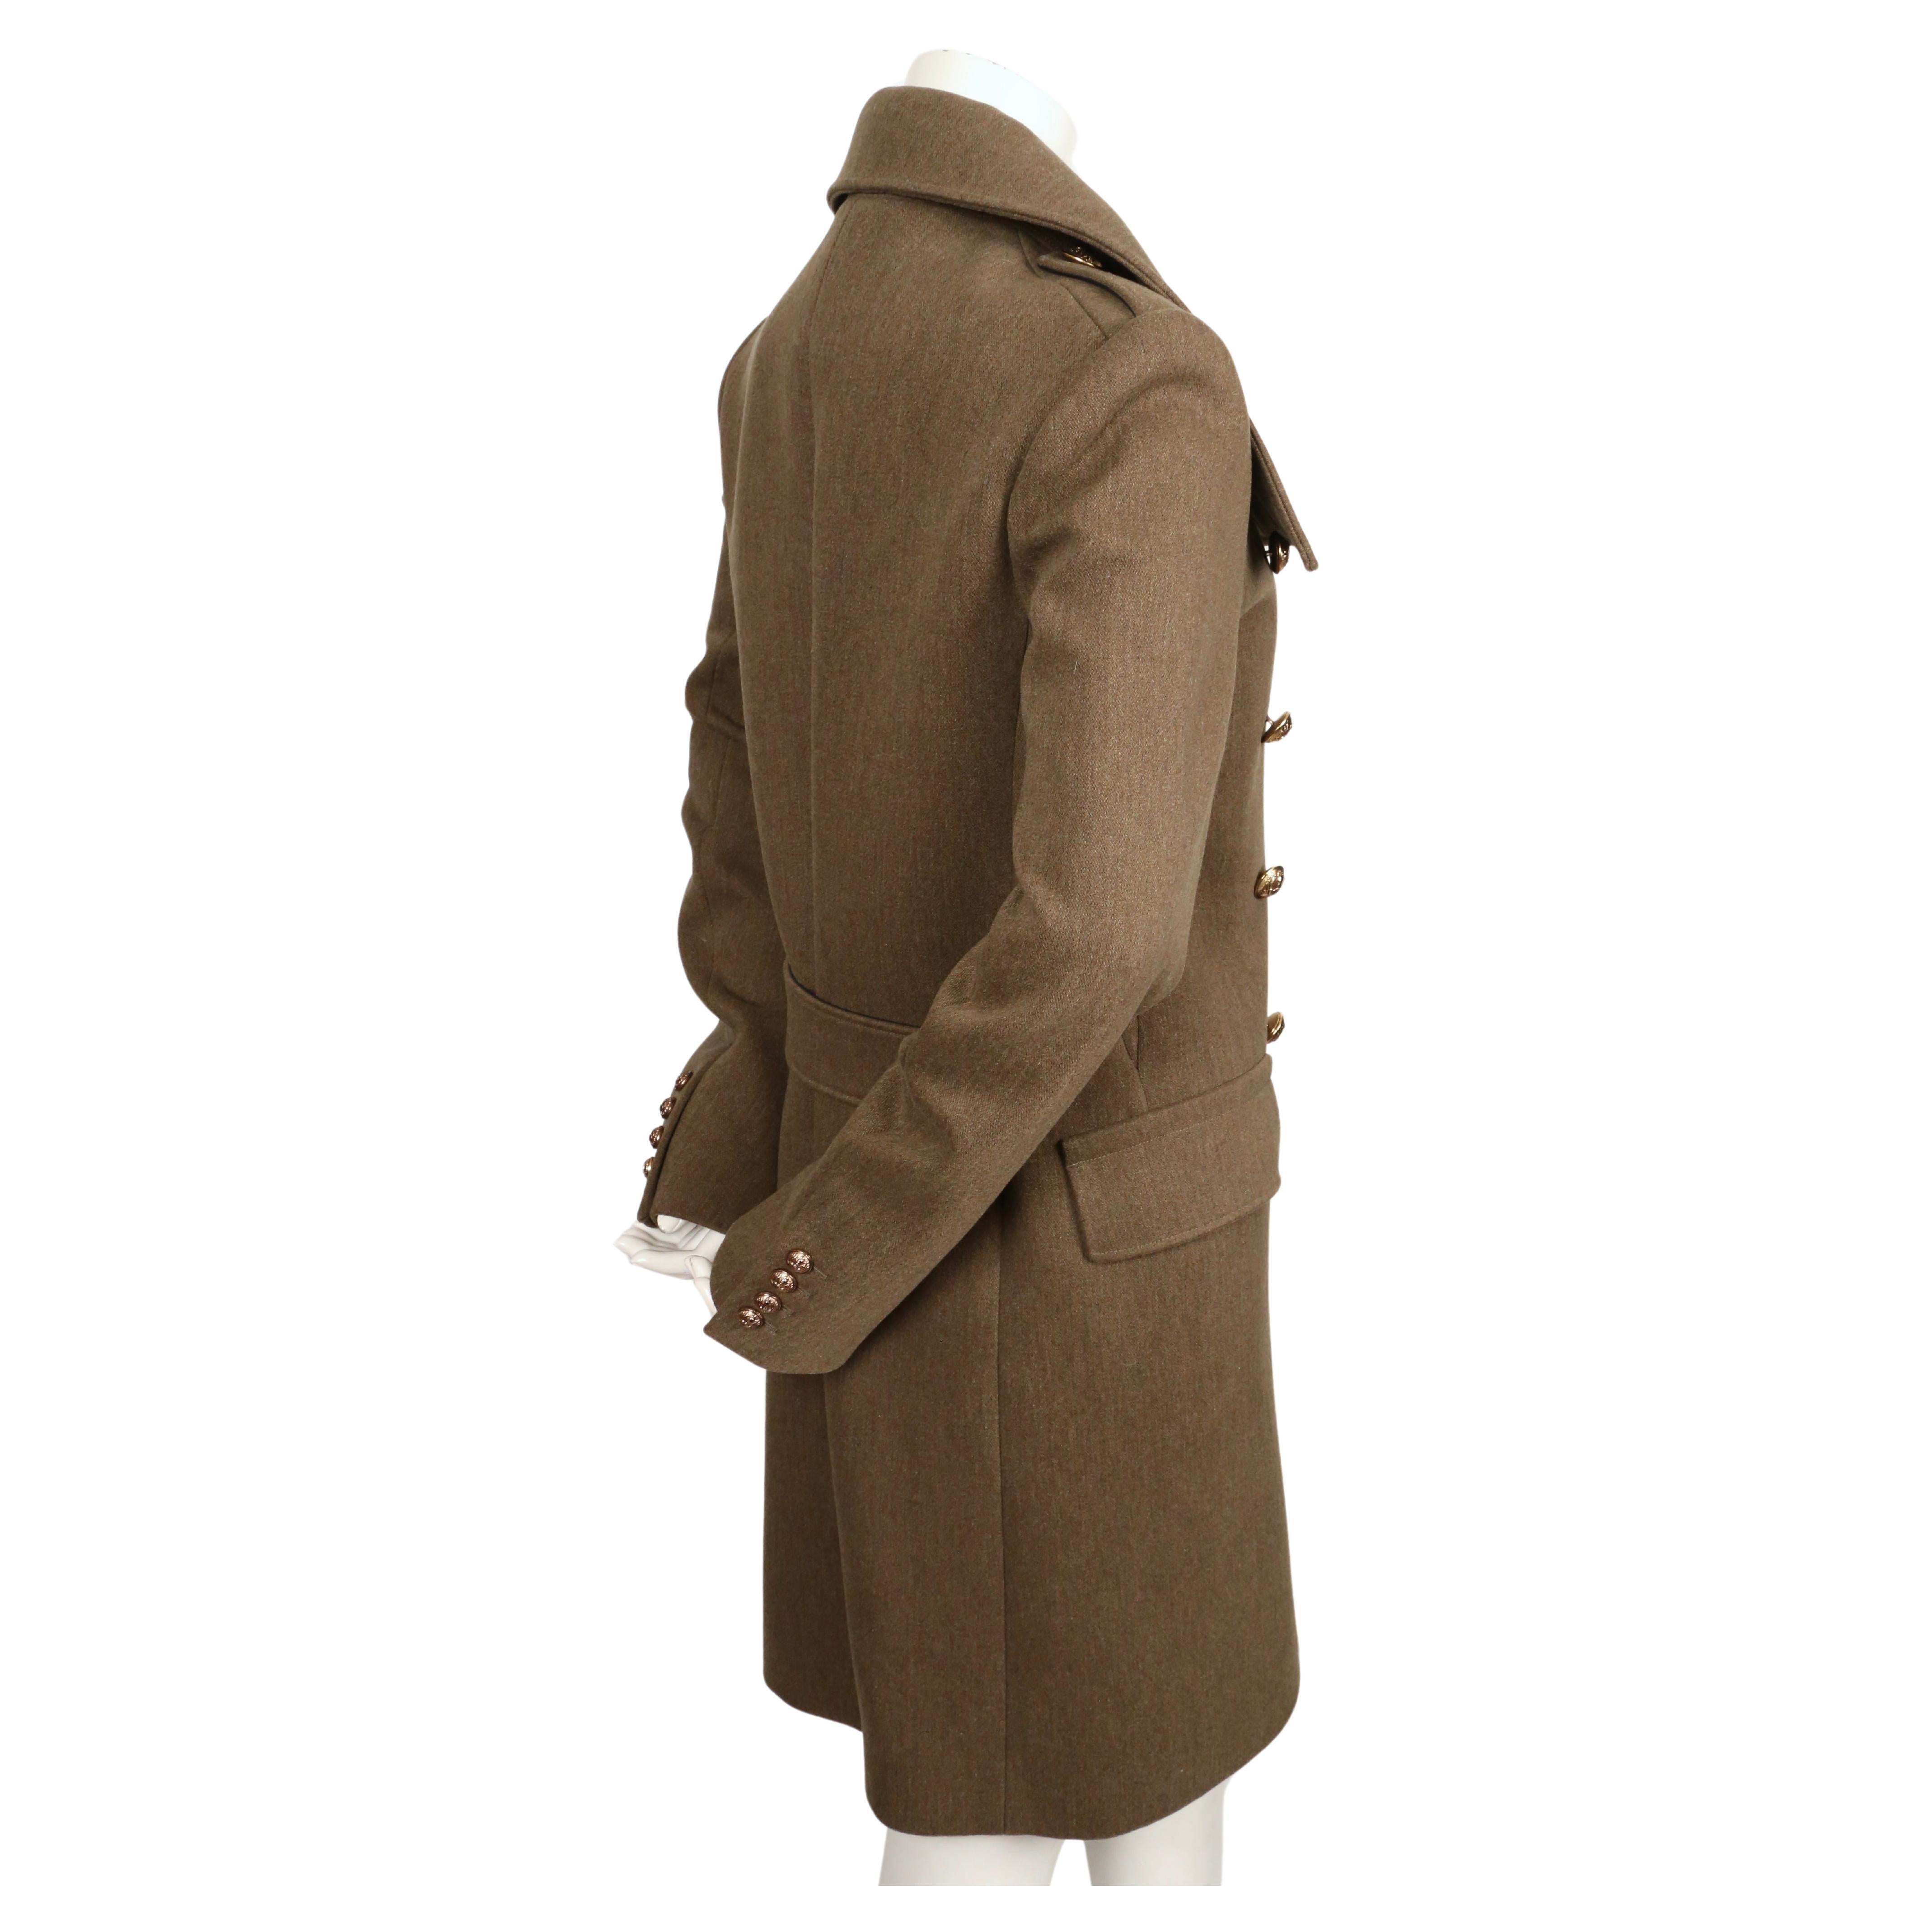 2011 BALMAIN olive green melton wool long military coat - new with tags For Sale 2